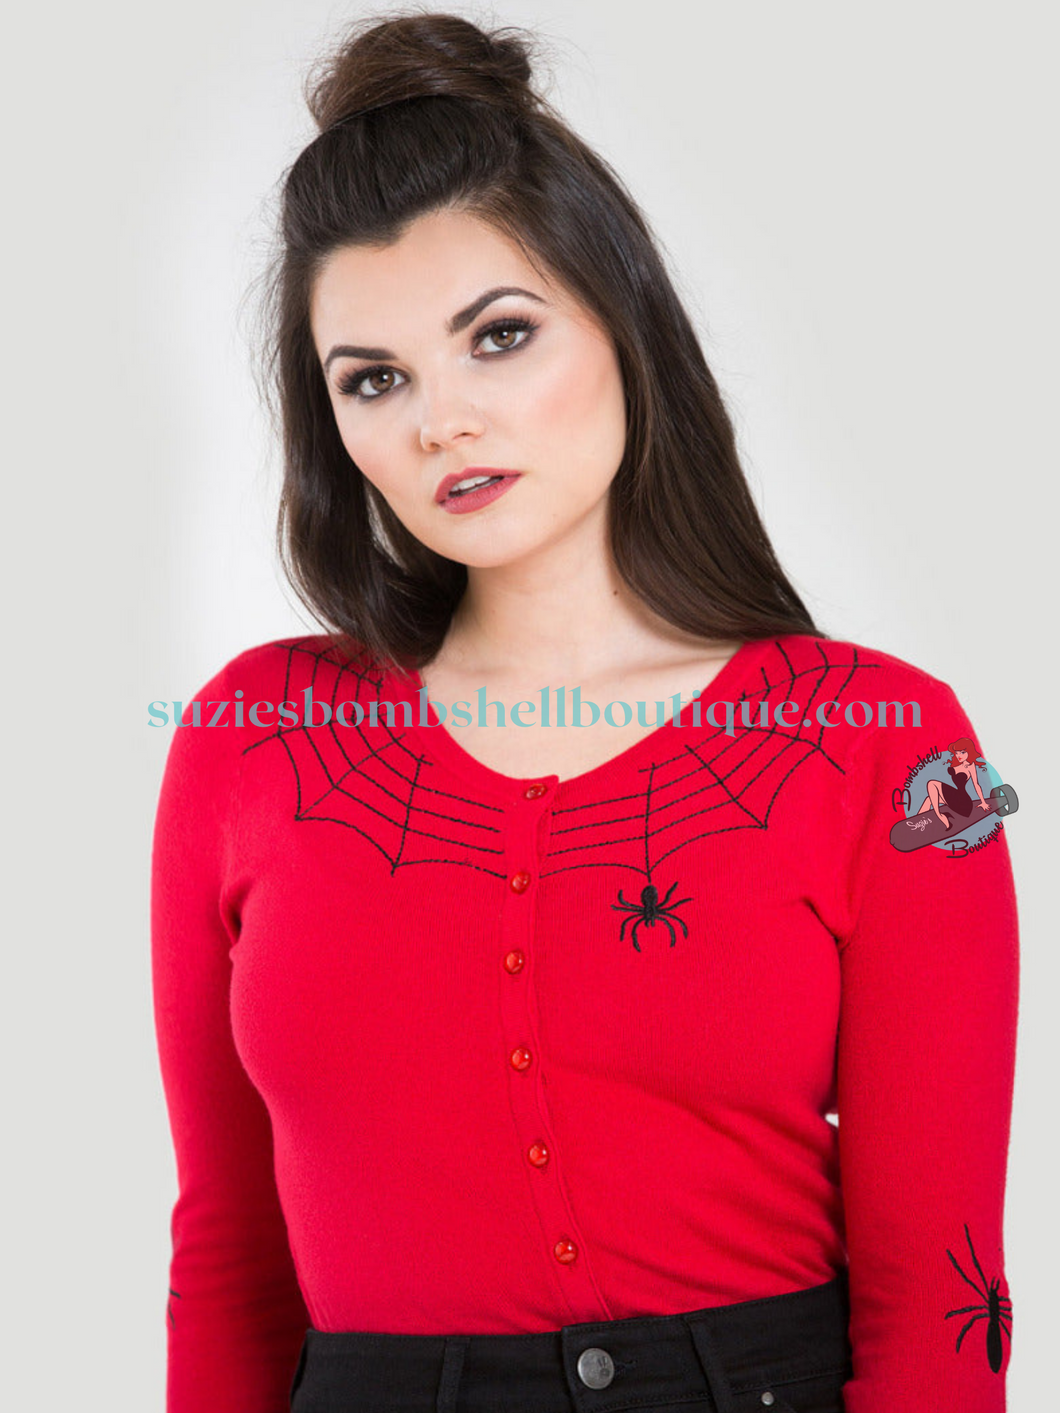 Hell Bunny CanadaHell Bunny Spider Cardigan red button up sweater in red knit with black spider and spiderweb embroidered at neckline and on elbows goth halloween spooky retro vintage altfashion pinup top knitwear 50s cardigan Canadian Pin-Up Shop Suzie's Bombshell Boutique plus size pinup clothing